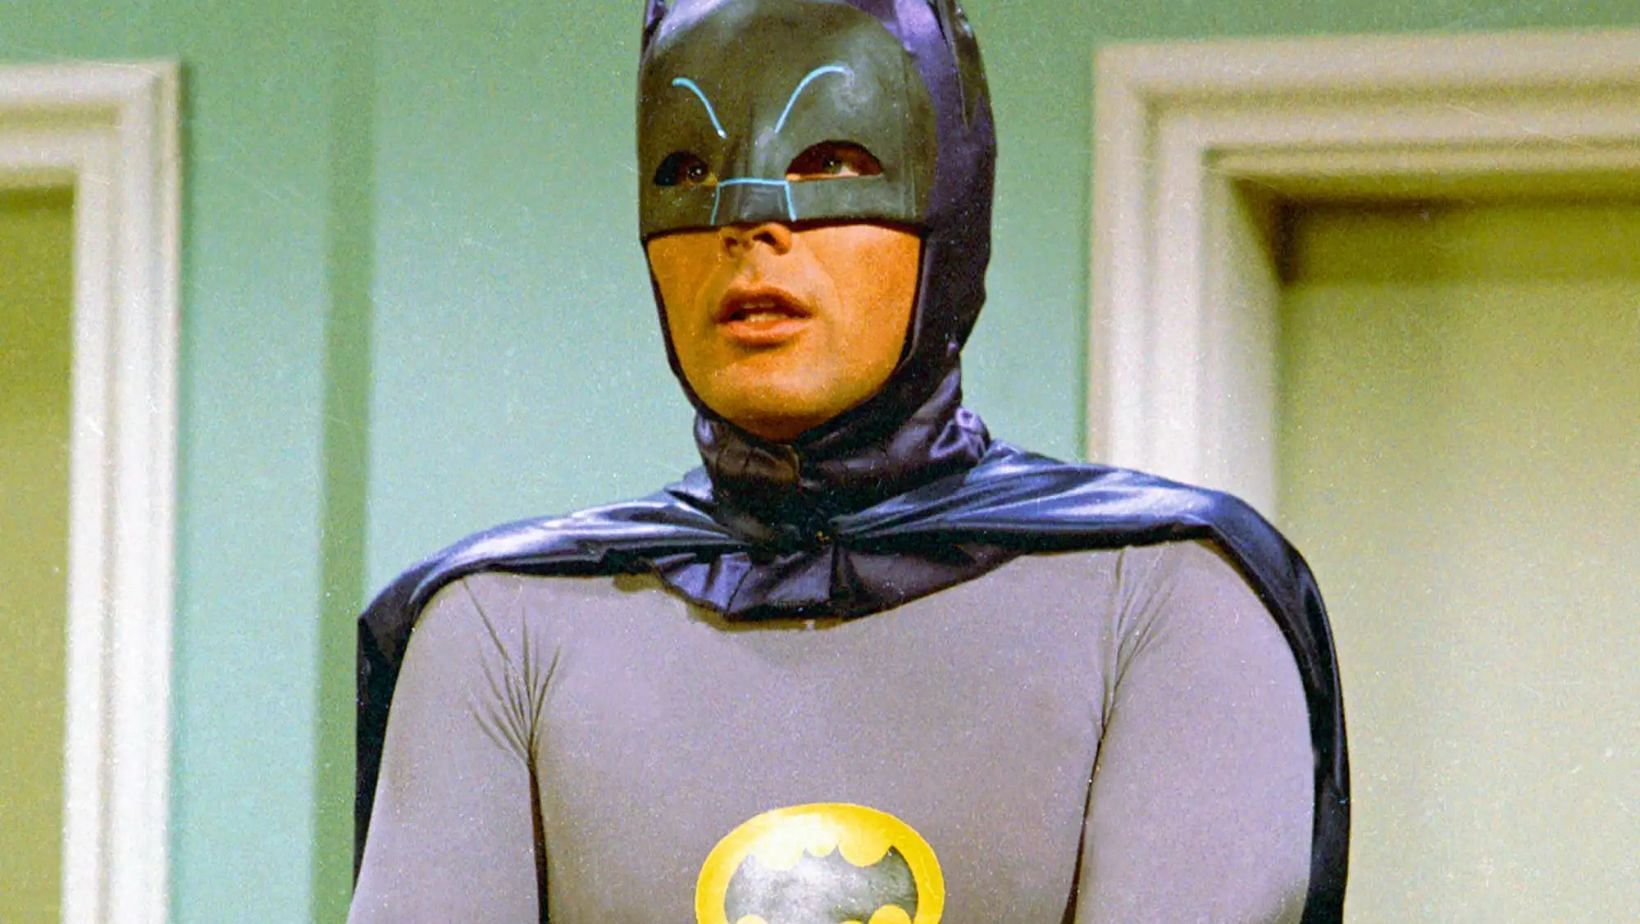 The iconic and colorful suit from the 1960s TV series (Image via Warner Bros)